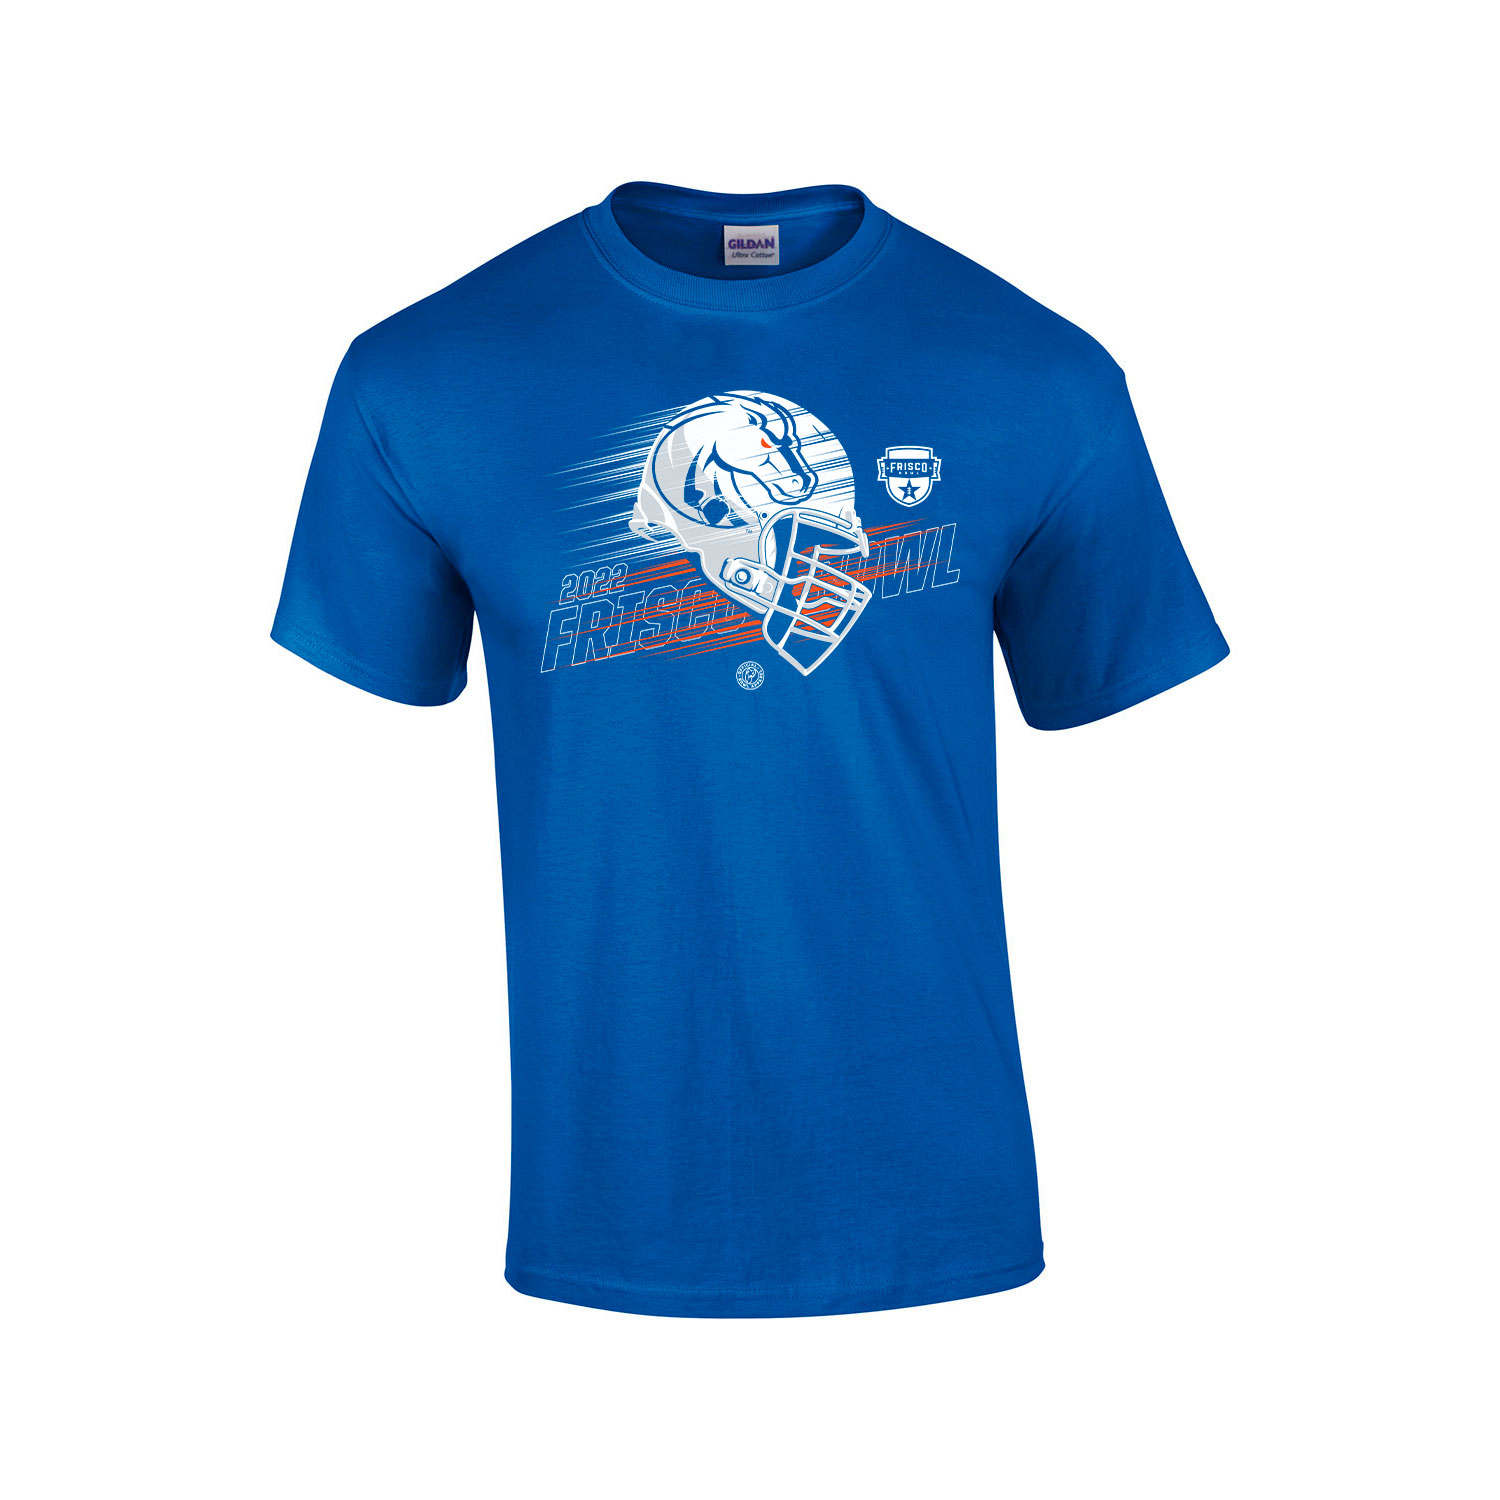 Boise State Blue Cotton Tee